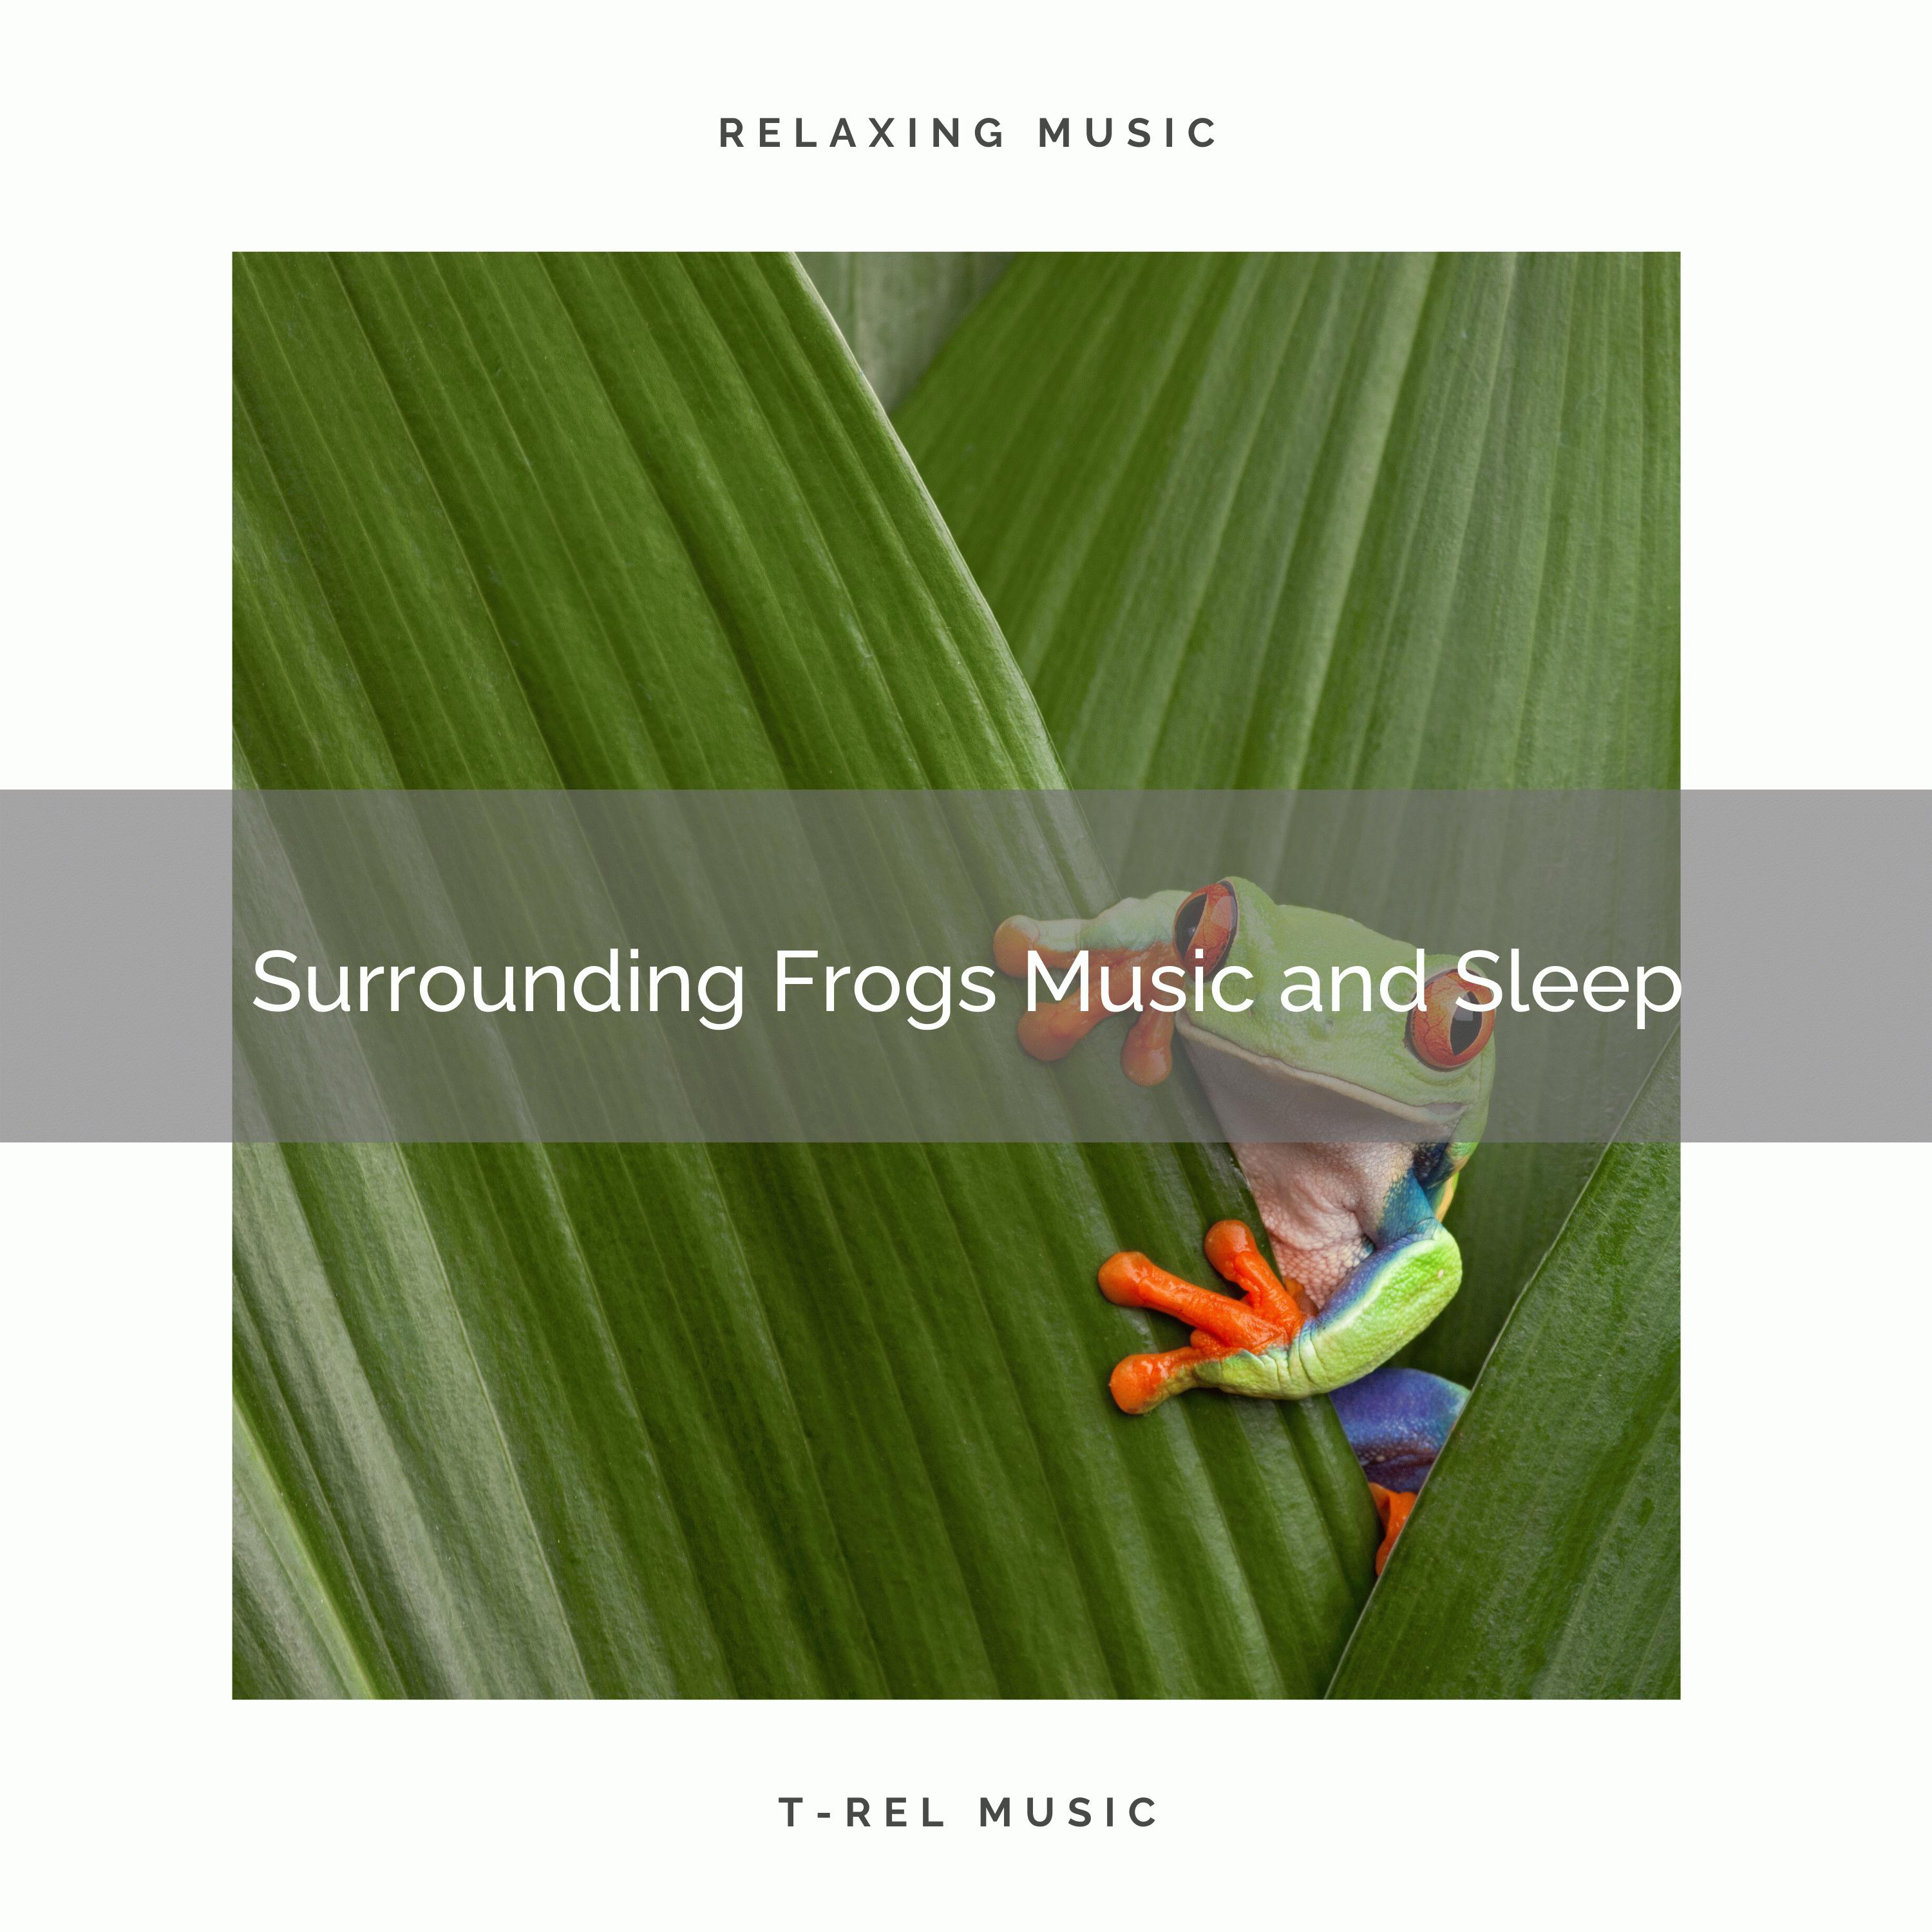 Stereo Outdoor Sampling - Variety of Frogs Music and Perfect Sleep